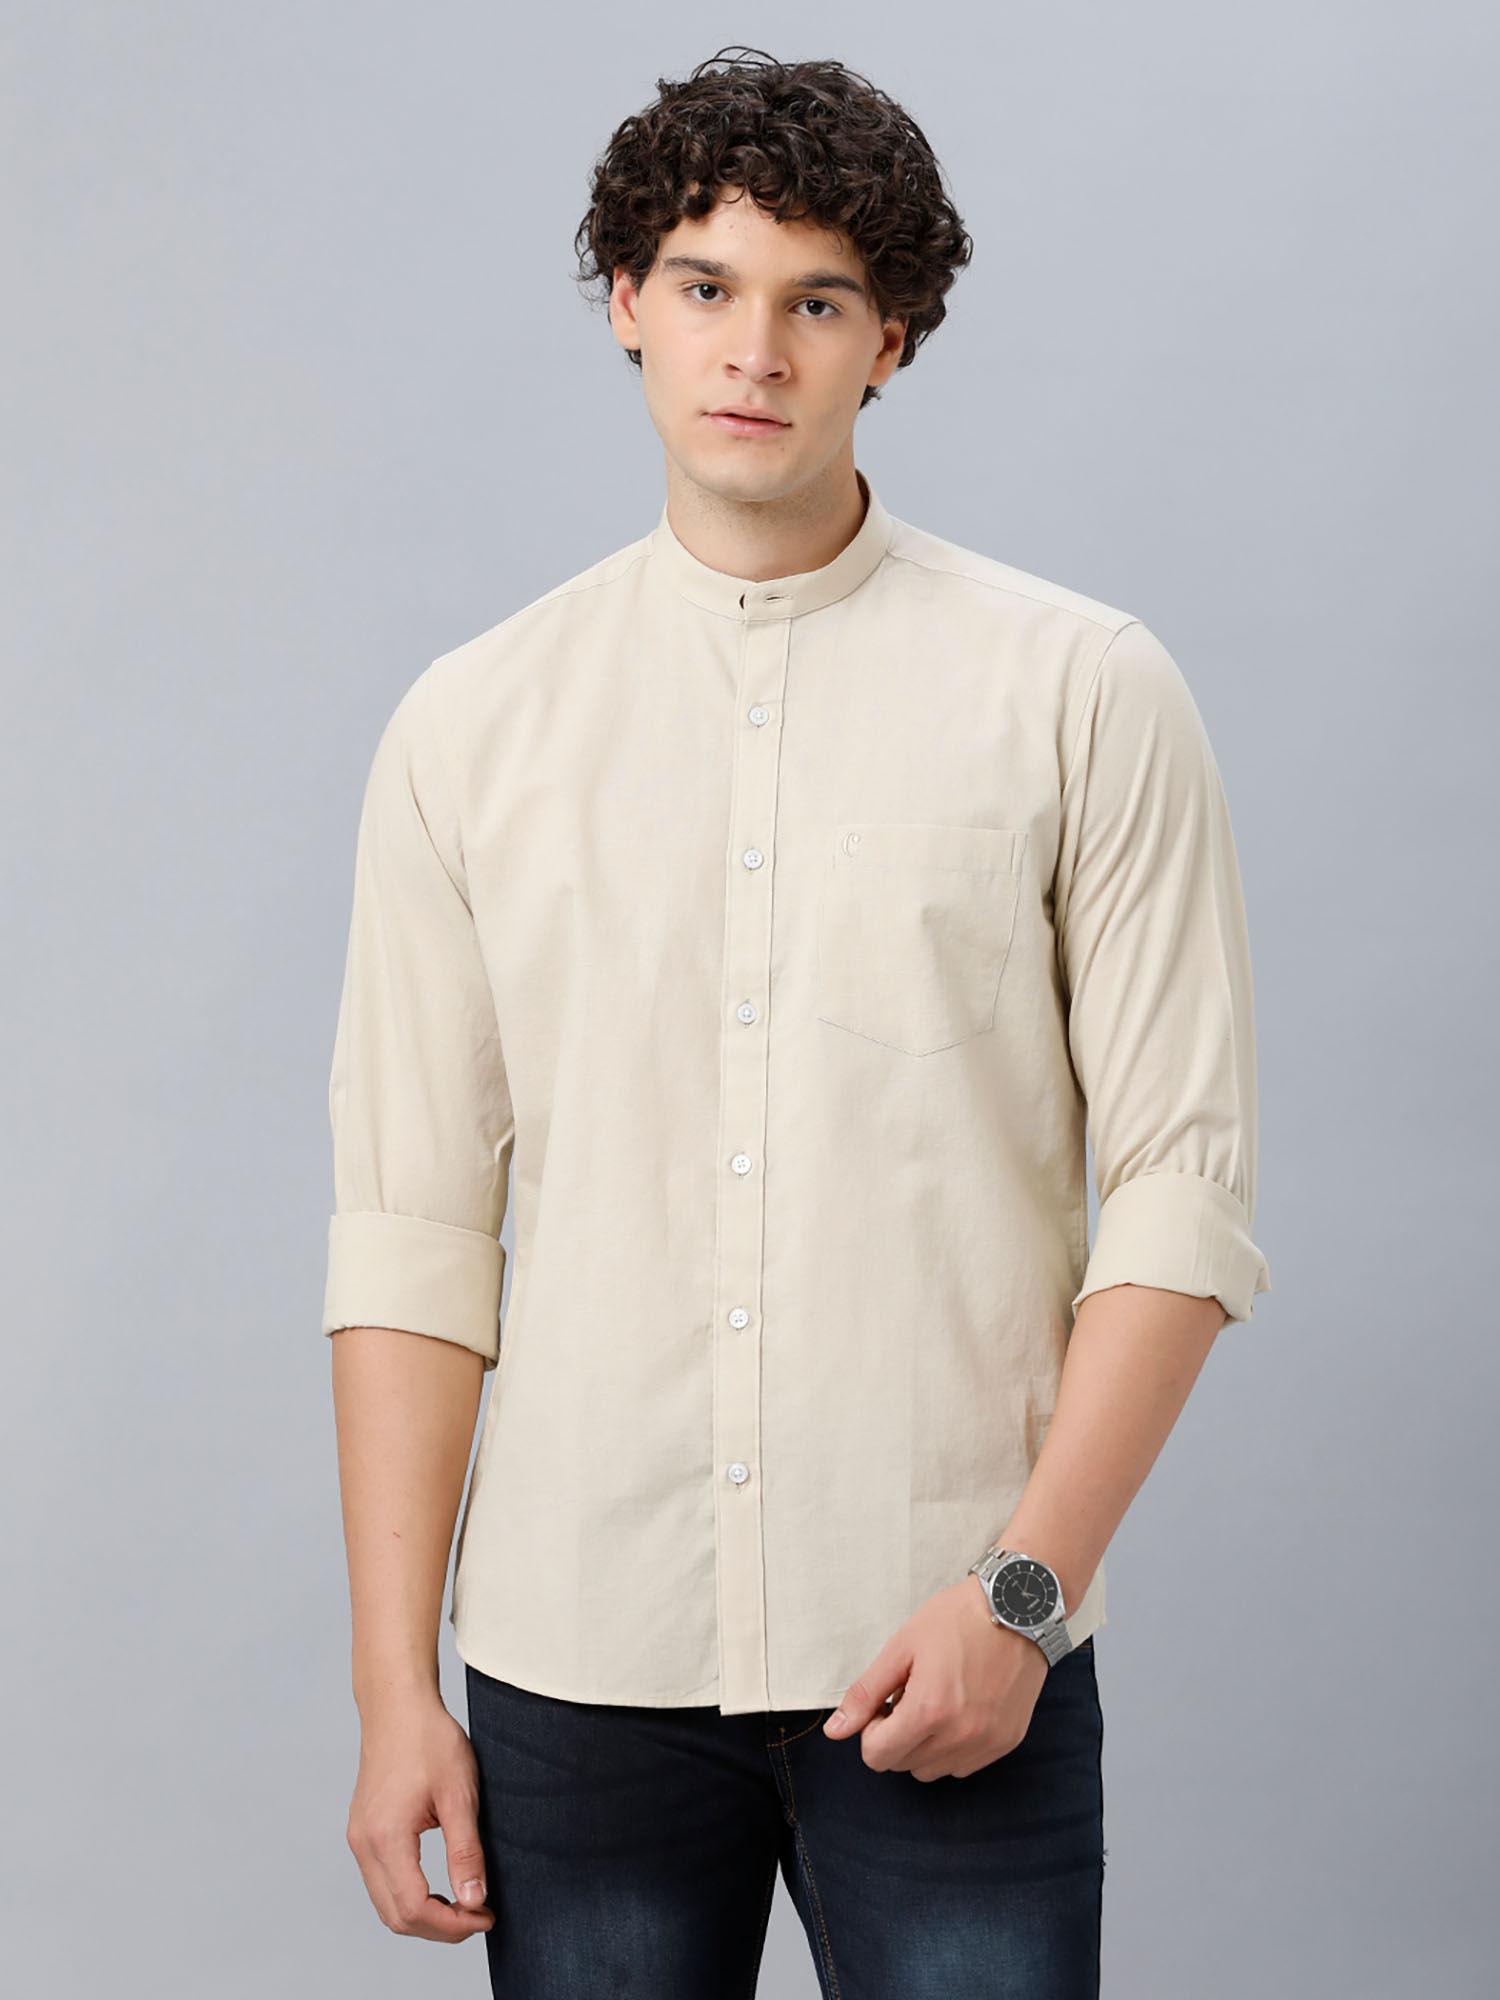 men's-cotton-linen-natural-/-brown-solid-slim-fit-full-sleeve-casual-shirt